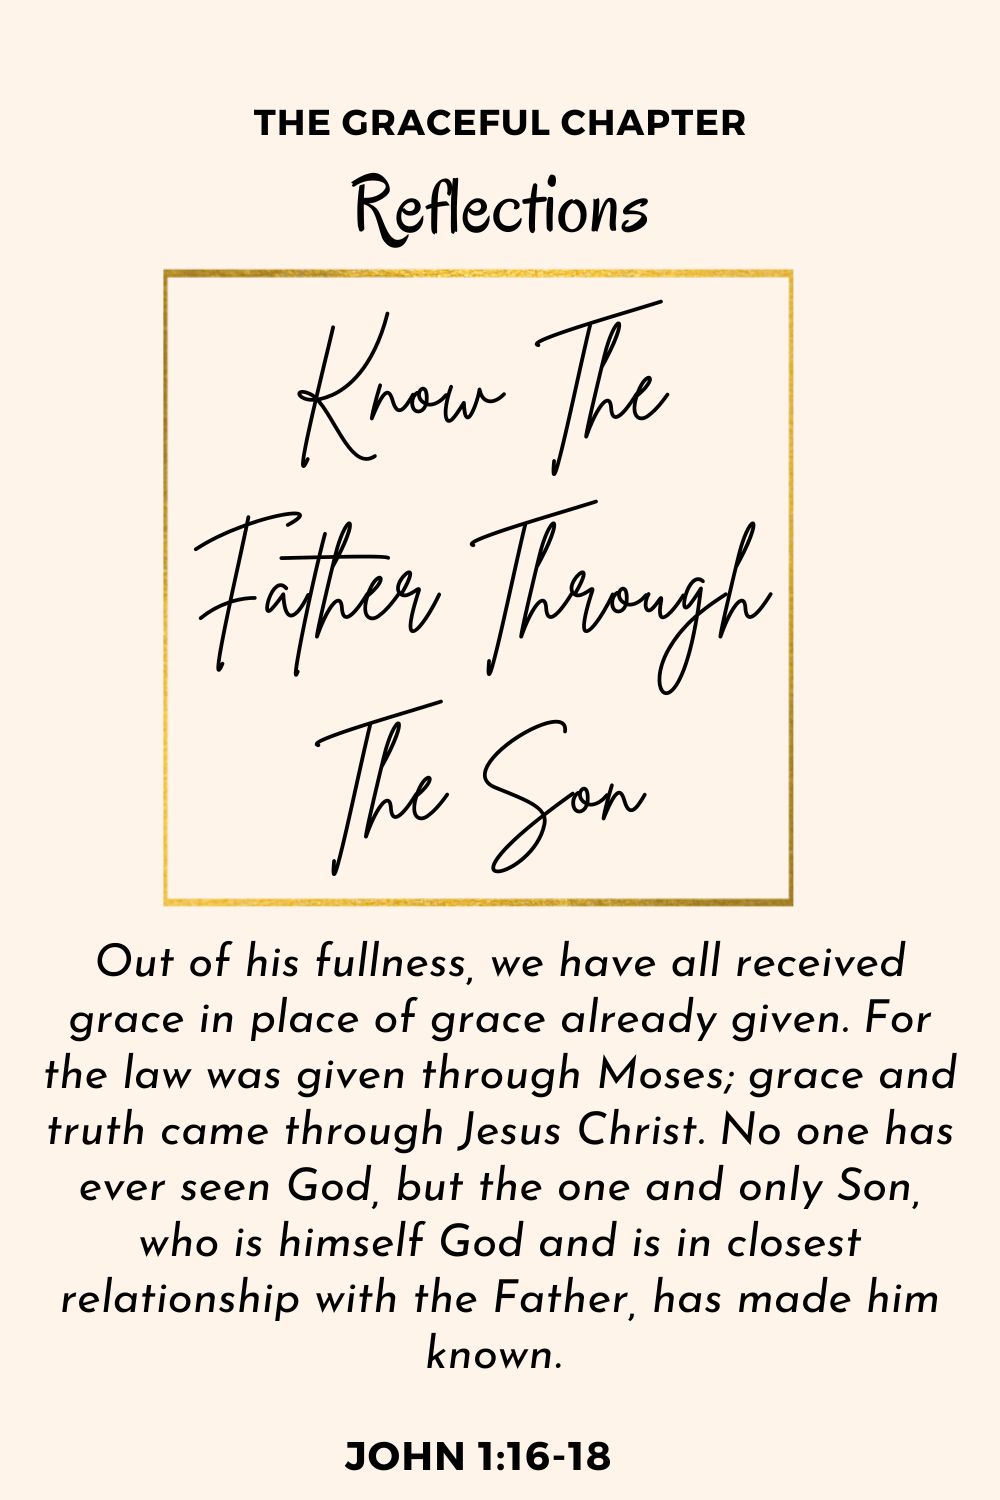 Reflection - John 1:16-18 - Know The Father Through The Son